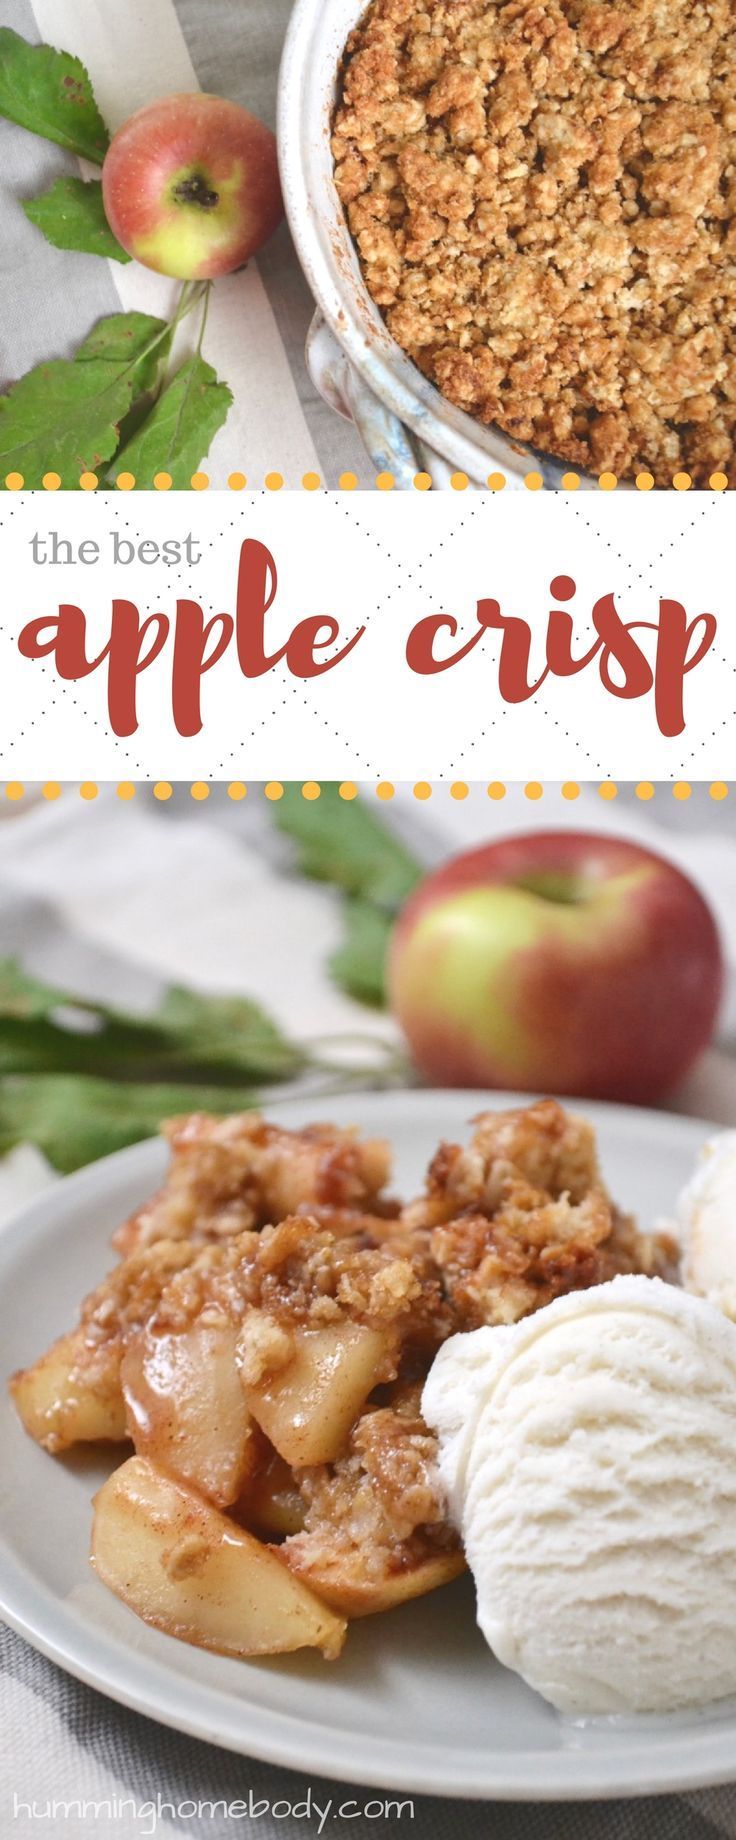 The topping on this apple crisp is packed with buttery, sugary, crumbly goodness. Apple crisp is the perfect fall dessert. Recipe